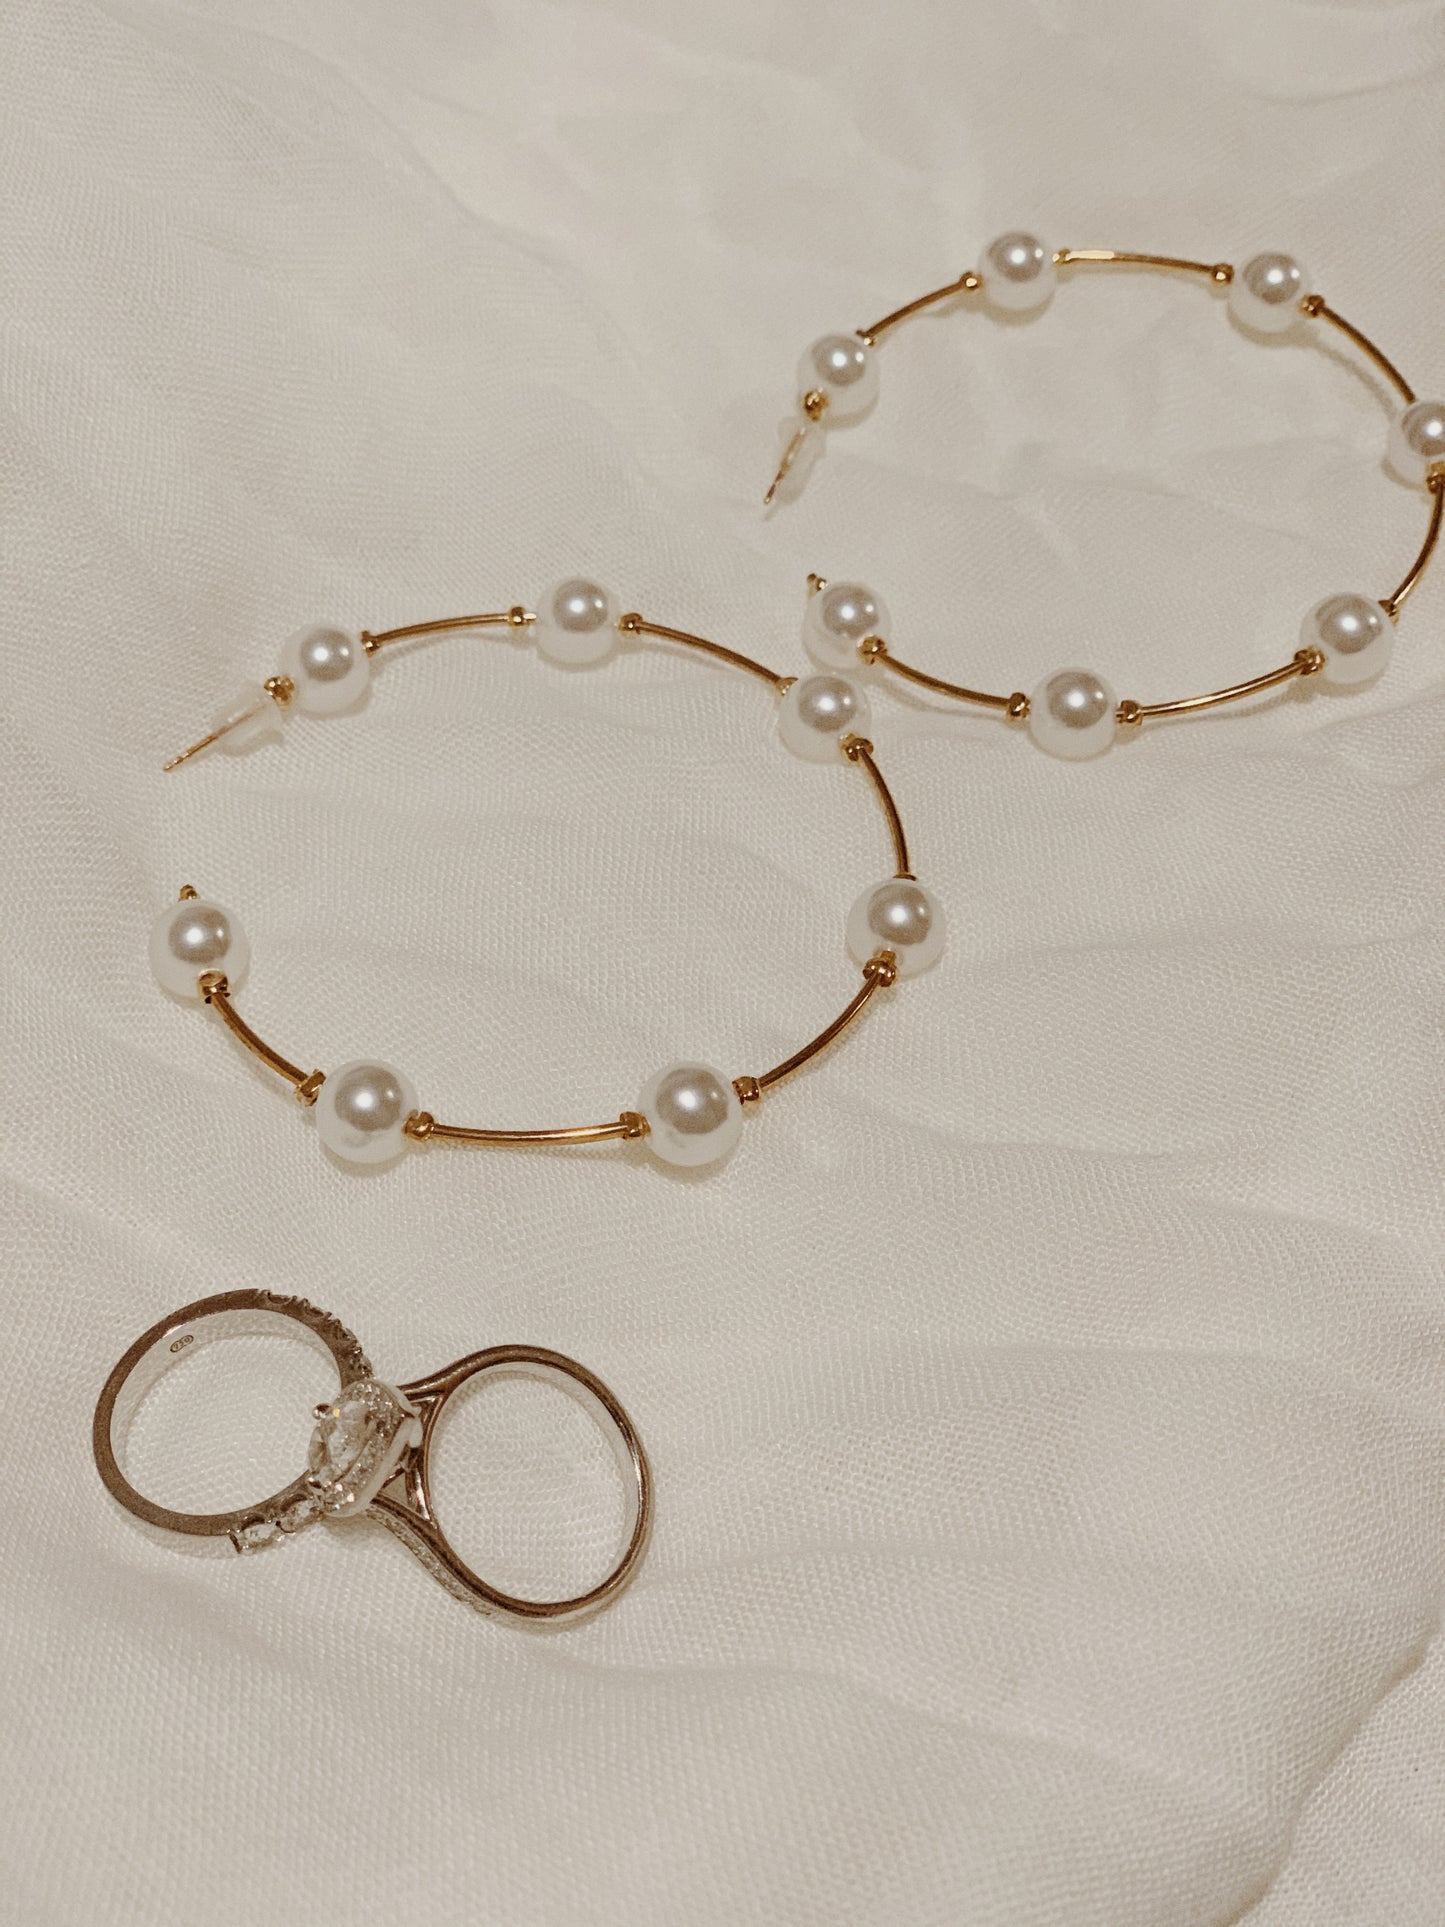 Daily Dainty Pearl Hoops | By: Life in the sun store